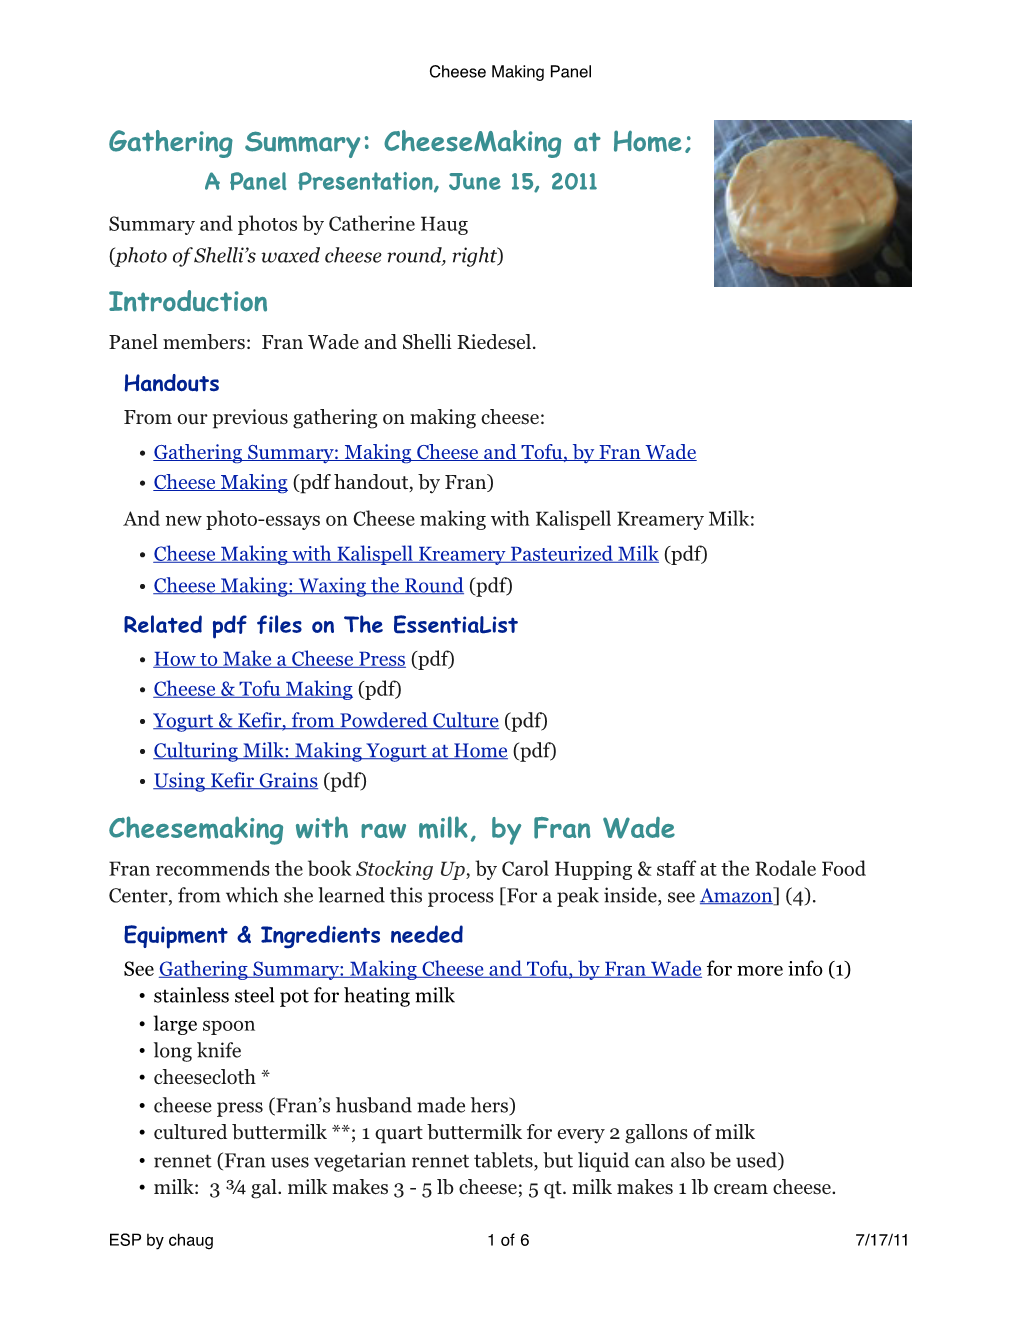 Introduction Cheesemaking with Raw Milk, by Fran Wade